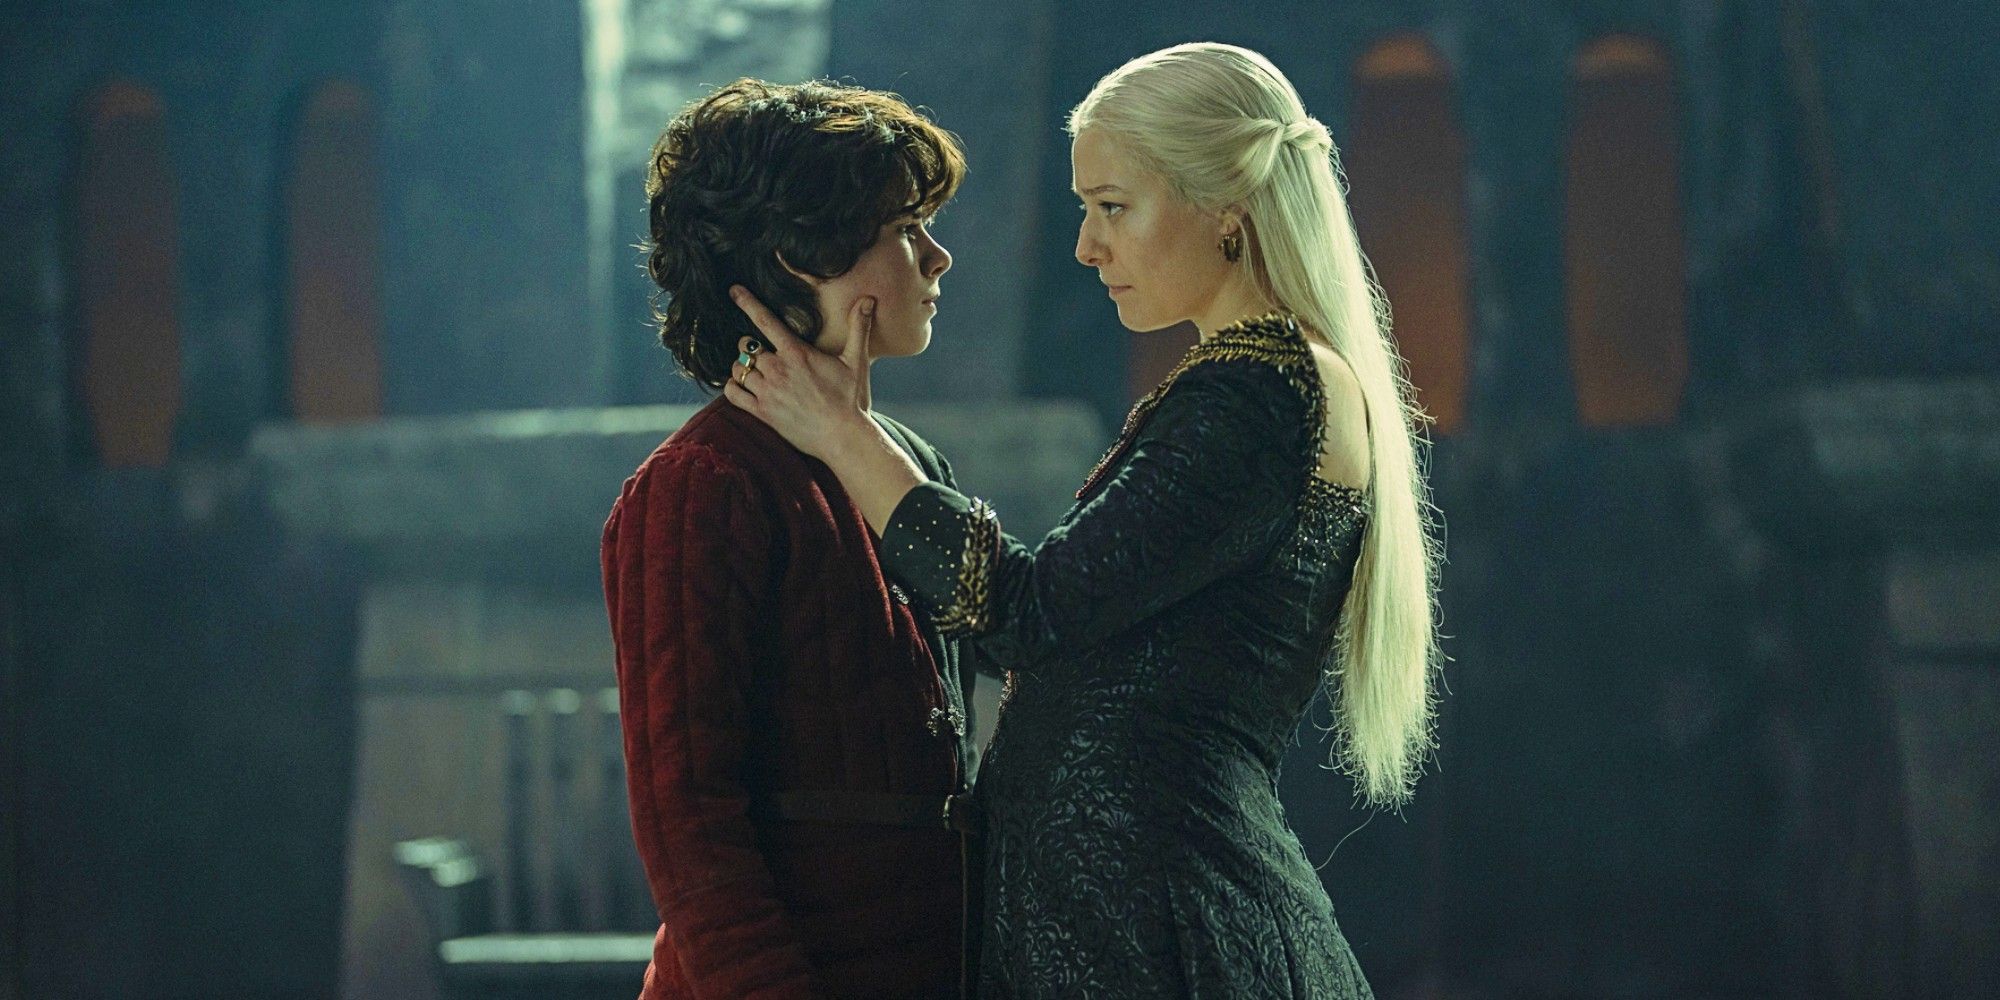 Rhaenyra and Lucerys in House of the Dragon.